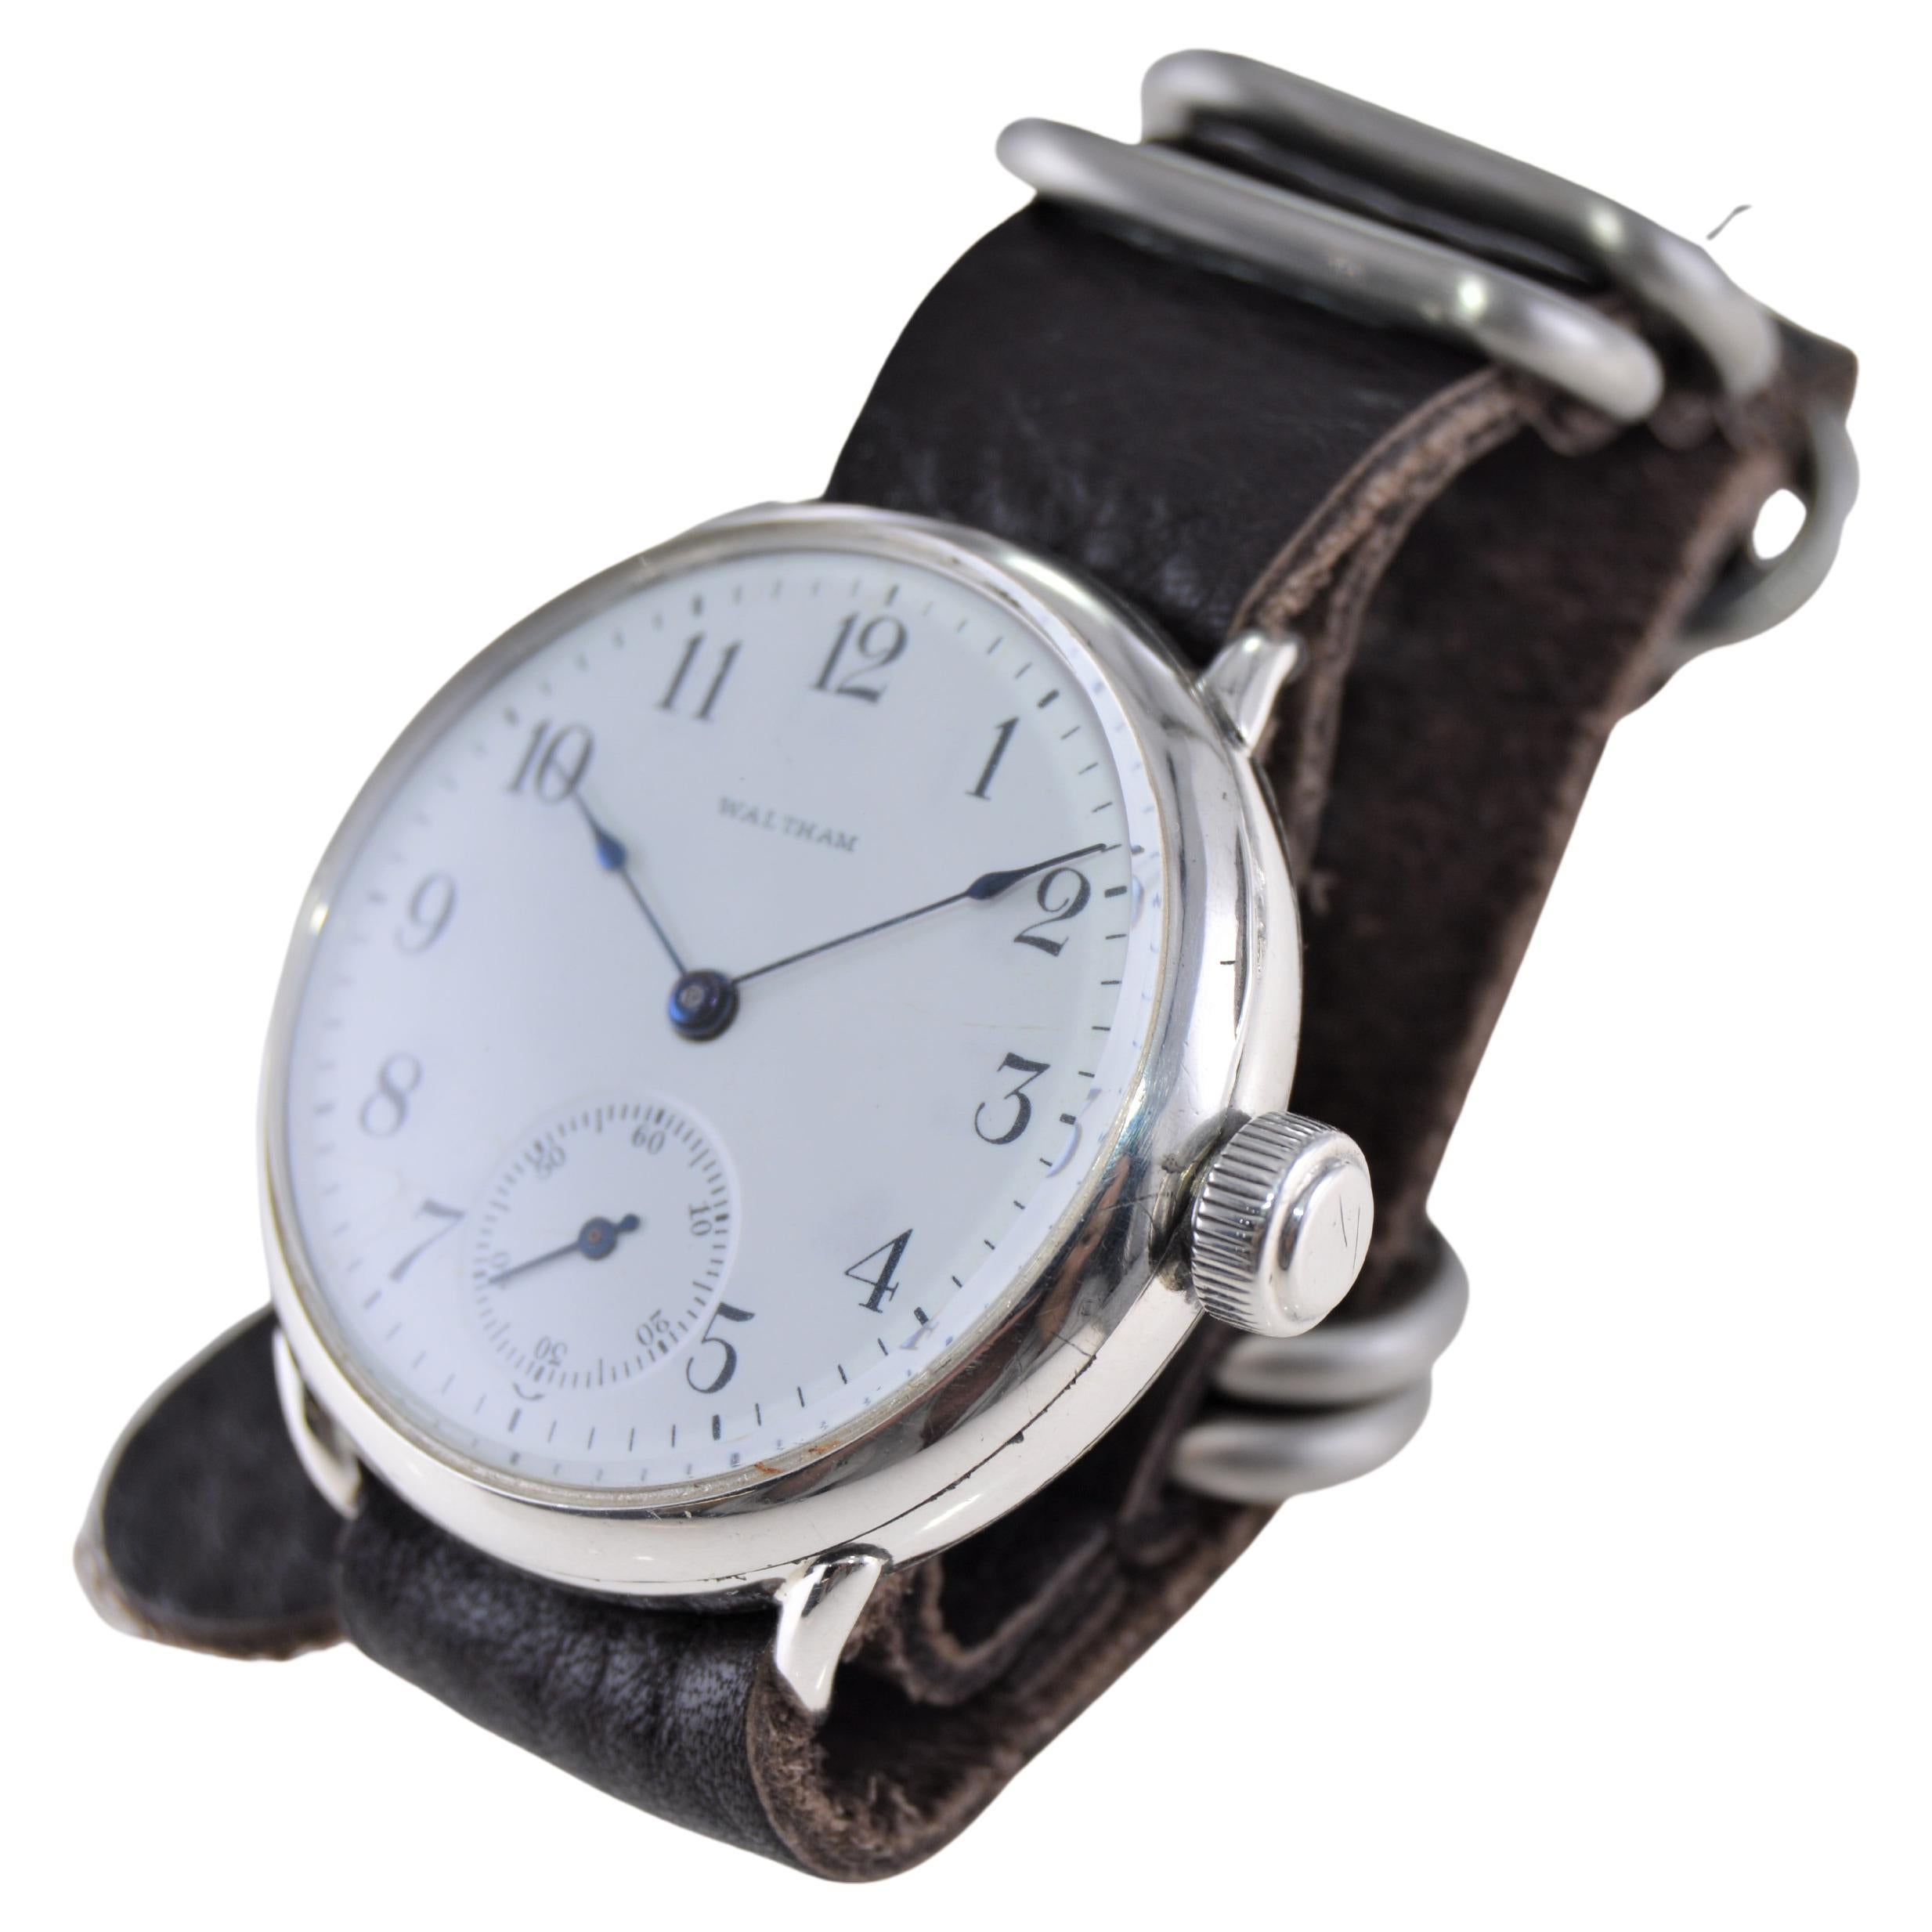 Waltham Sterling Silver Campaign Style Watch from 1901 with Original Enamel Dial 1